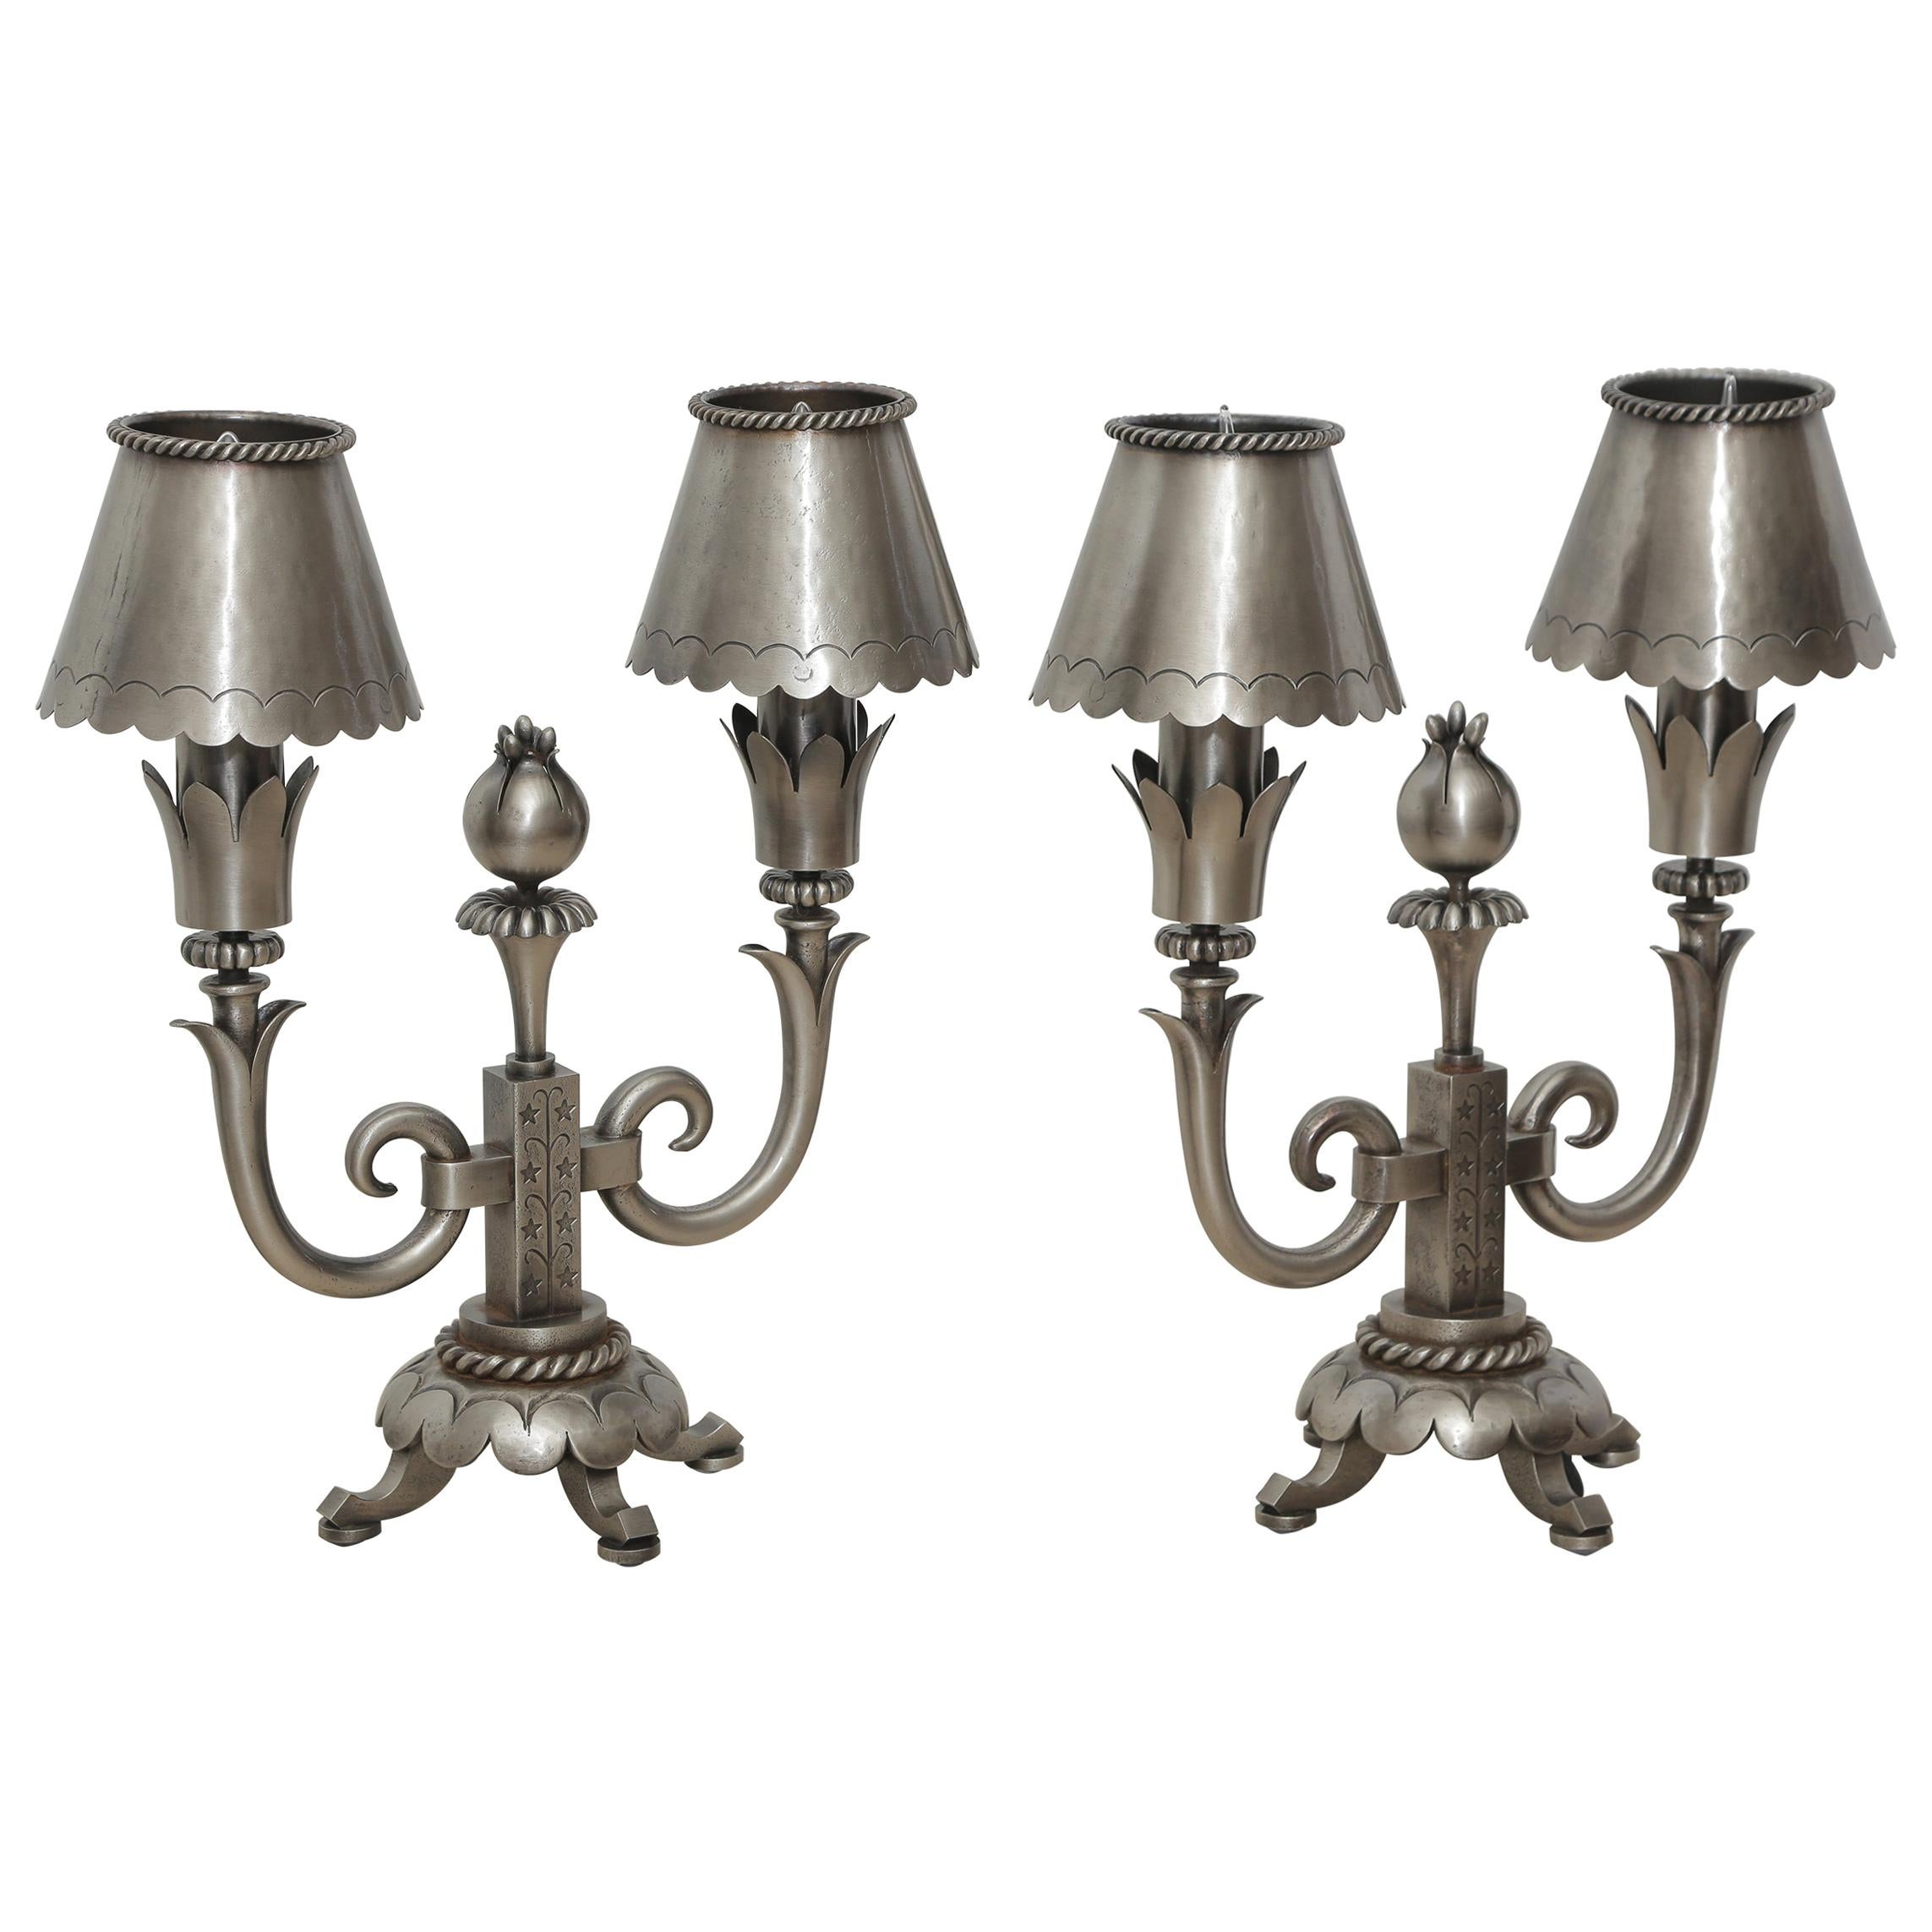 Pair of Midcentury Polished Wrought Iron Table Lamps Attributed to Poillerat